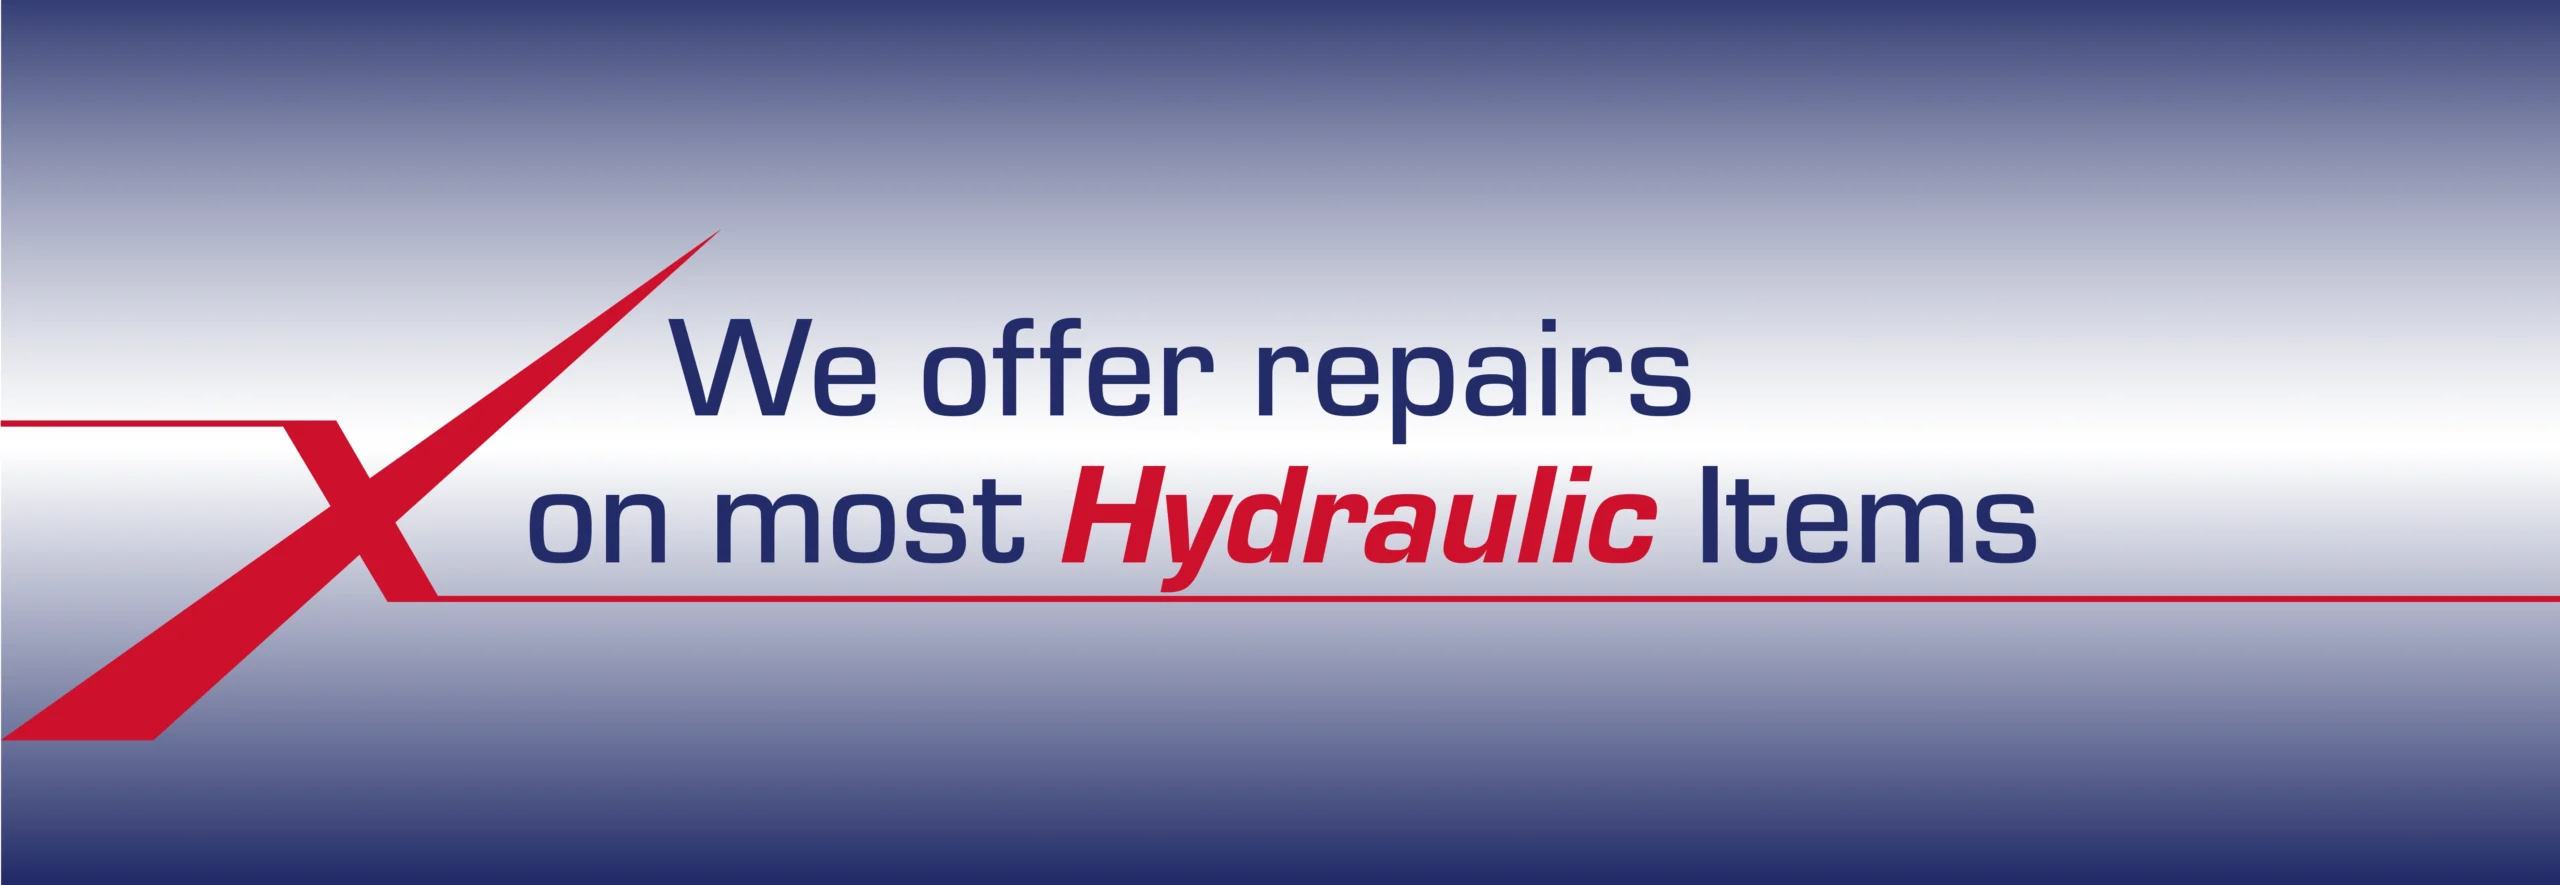 We offer repairs on most Hydraulic Items